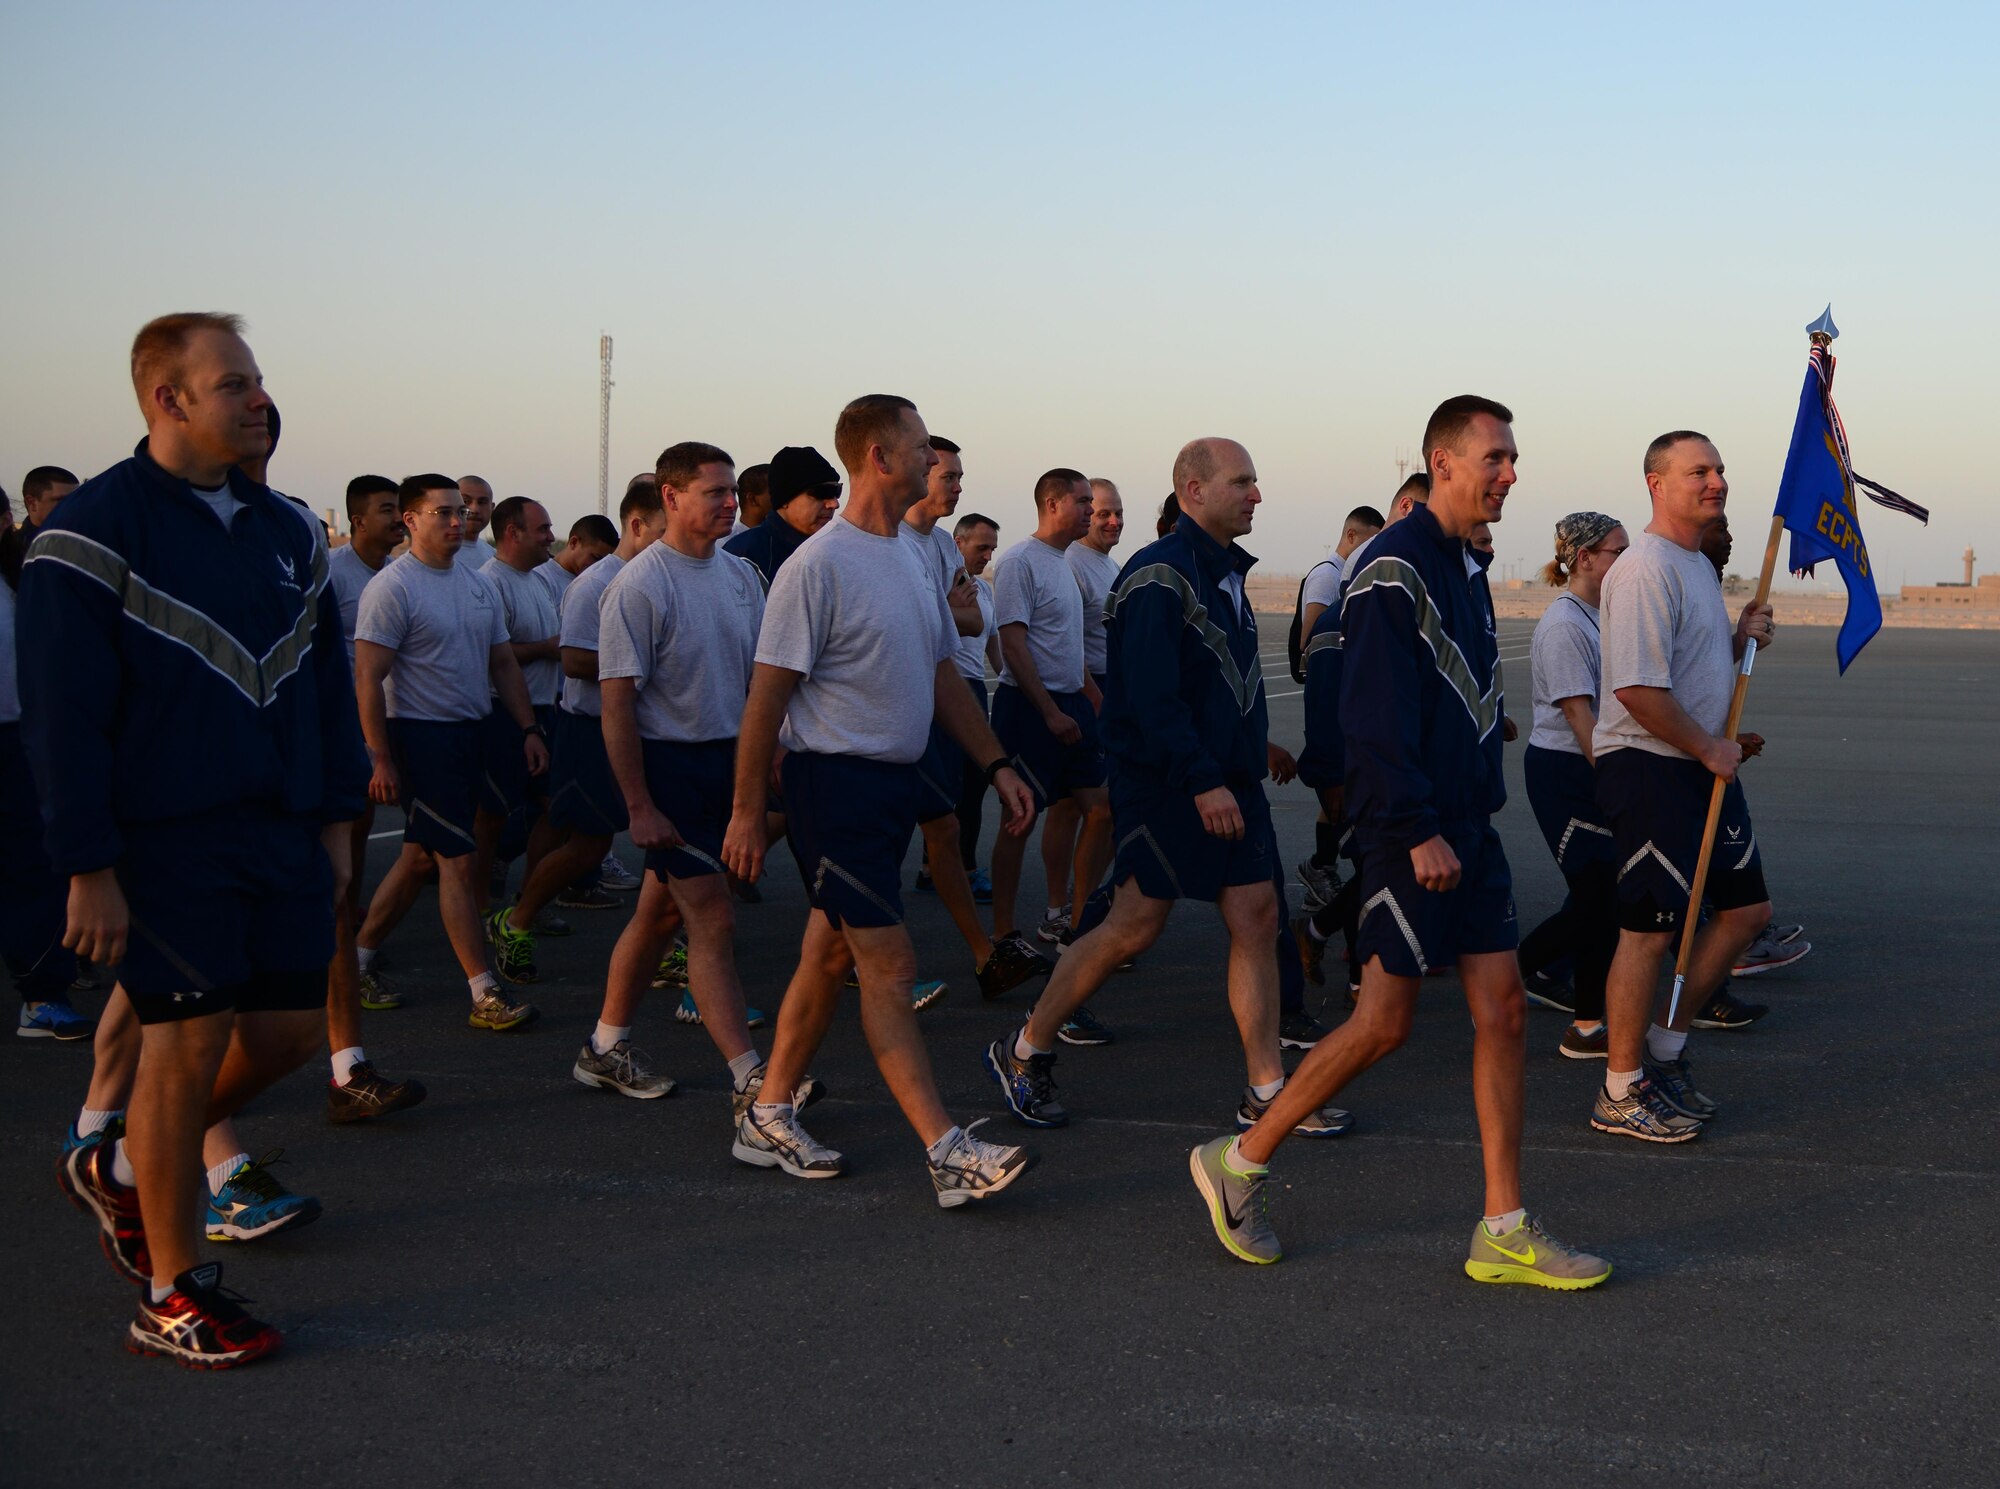 Airmen from the 379th Air Expeditionary  Wing  march in formation before a 1.5 mile run during Qatar National Sports Day, Feb. 10, 2015, at Al Udeid Air Base, Qatar. The run kicked off the rest of the morning’s events that included soccer and volleyball. (U.S. Air Force photo by Senior Airman Kia Atkins)